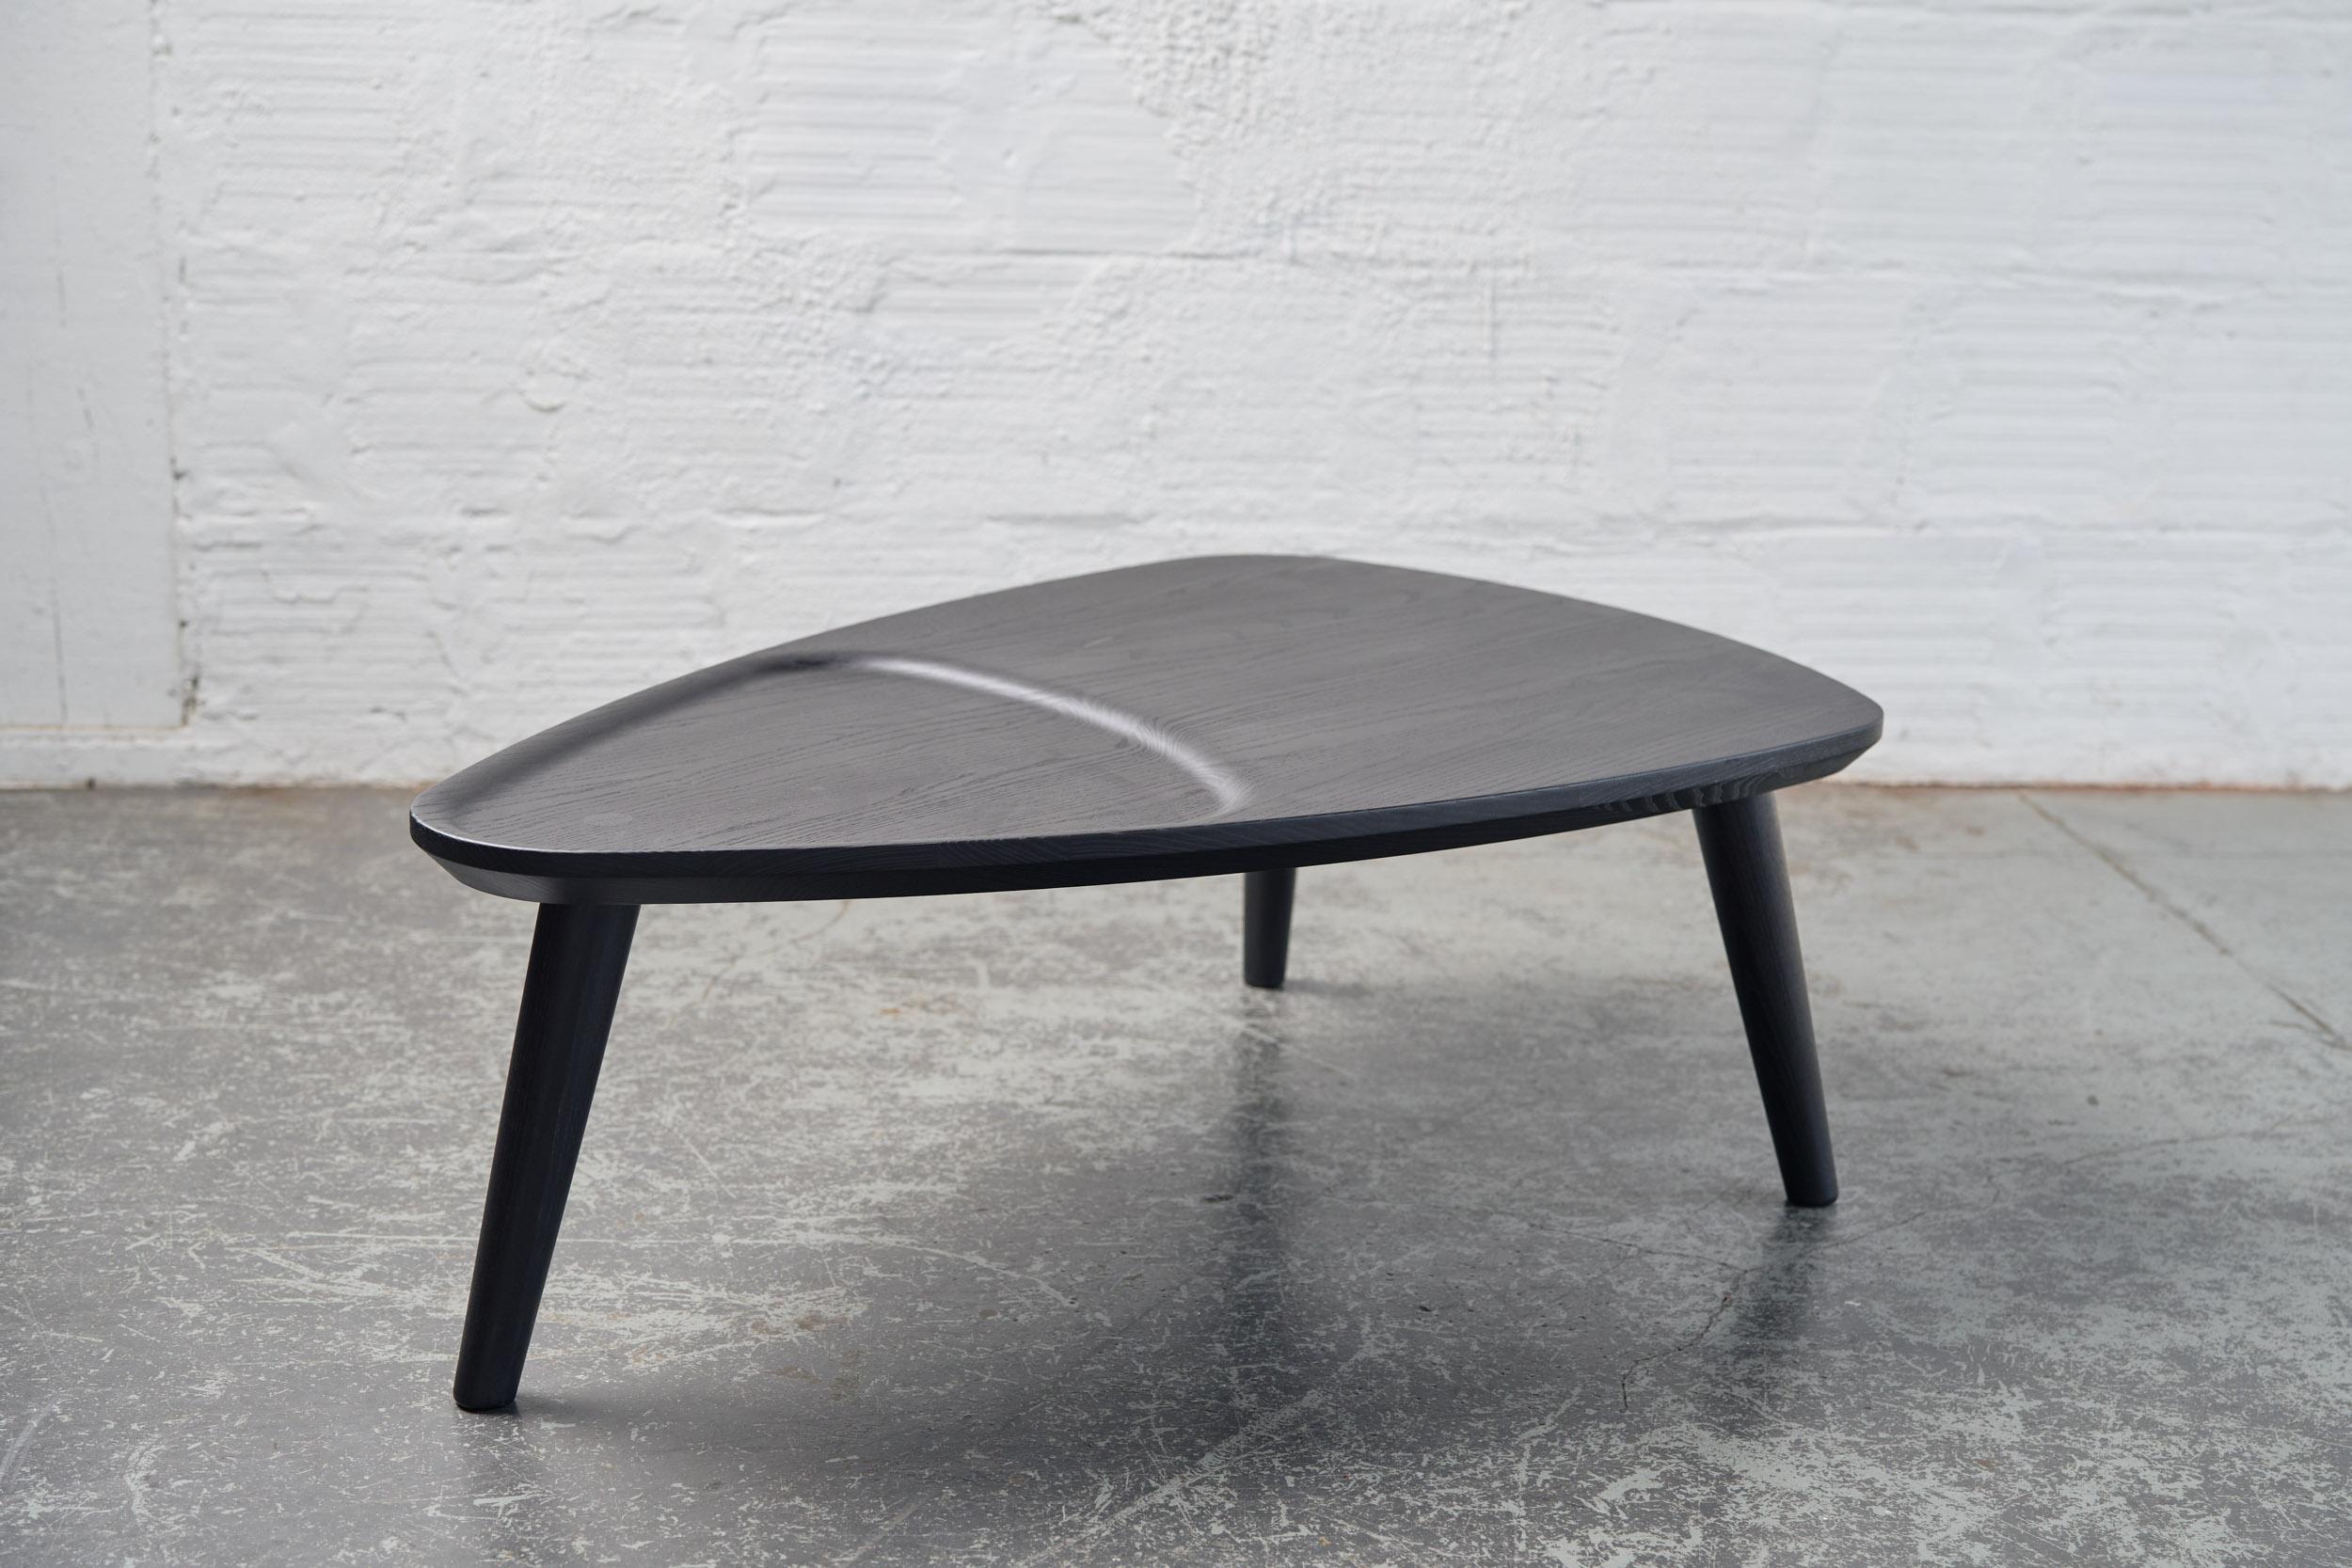 Charcoal Ash Oxbend Coffee Table by Fernweh Woodworking
Dimensions: Side A 127 x Side B 122 x Side C 89 x H 40.5 cm.
Materials: Charcoal Ash.

Available in walnut and white ash. Also available in 47 cm height. Please contact us.

Justin Nelson
He is